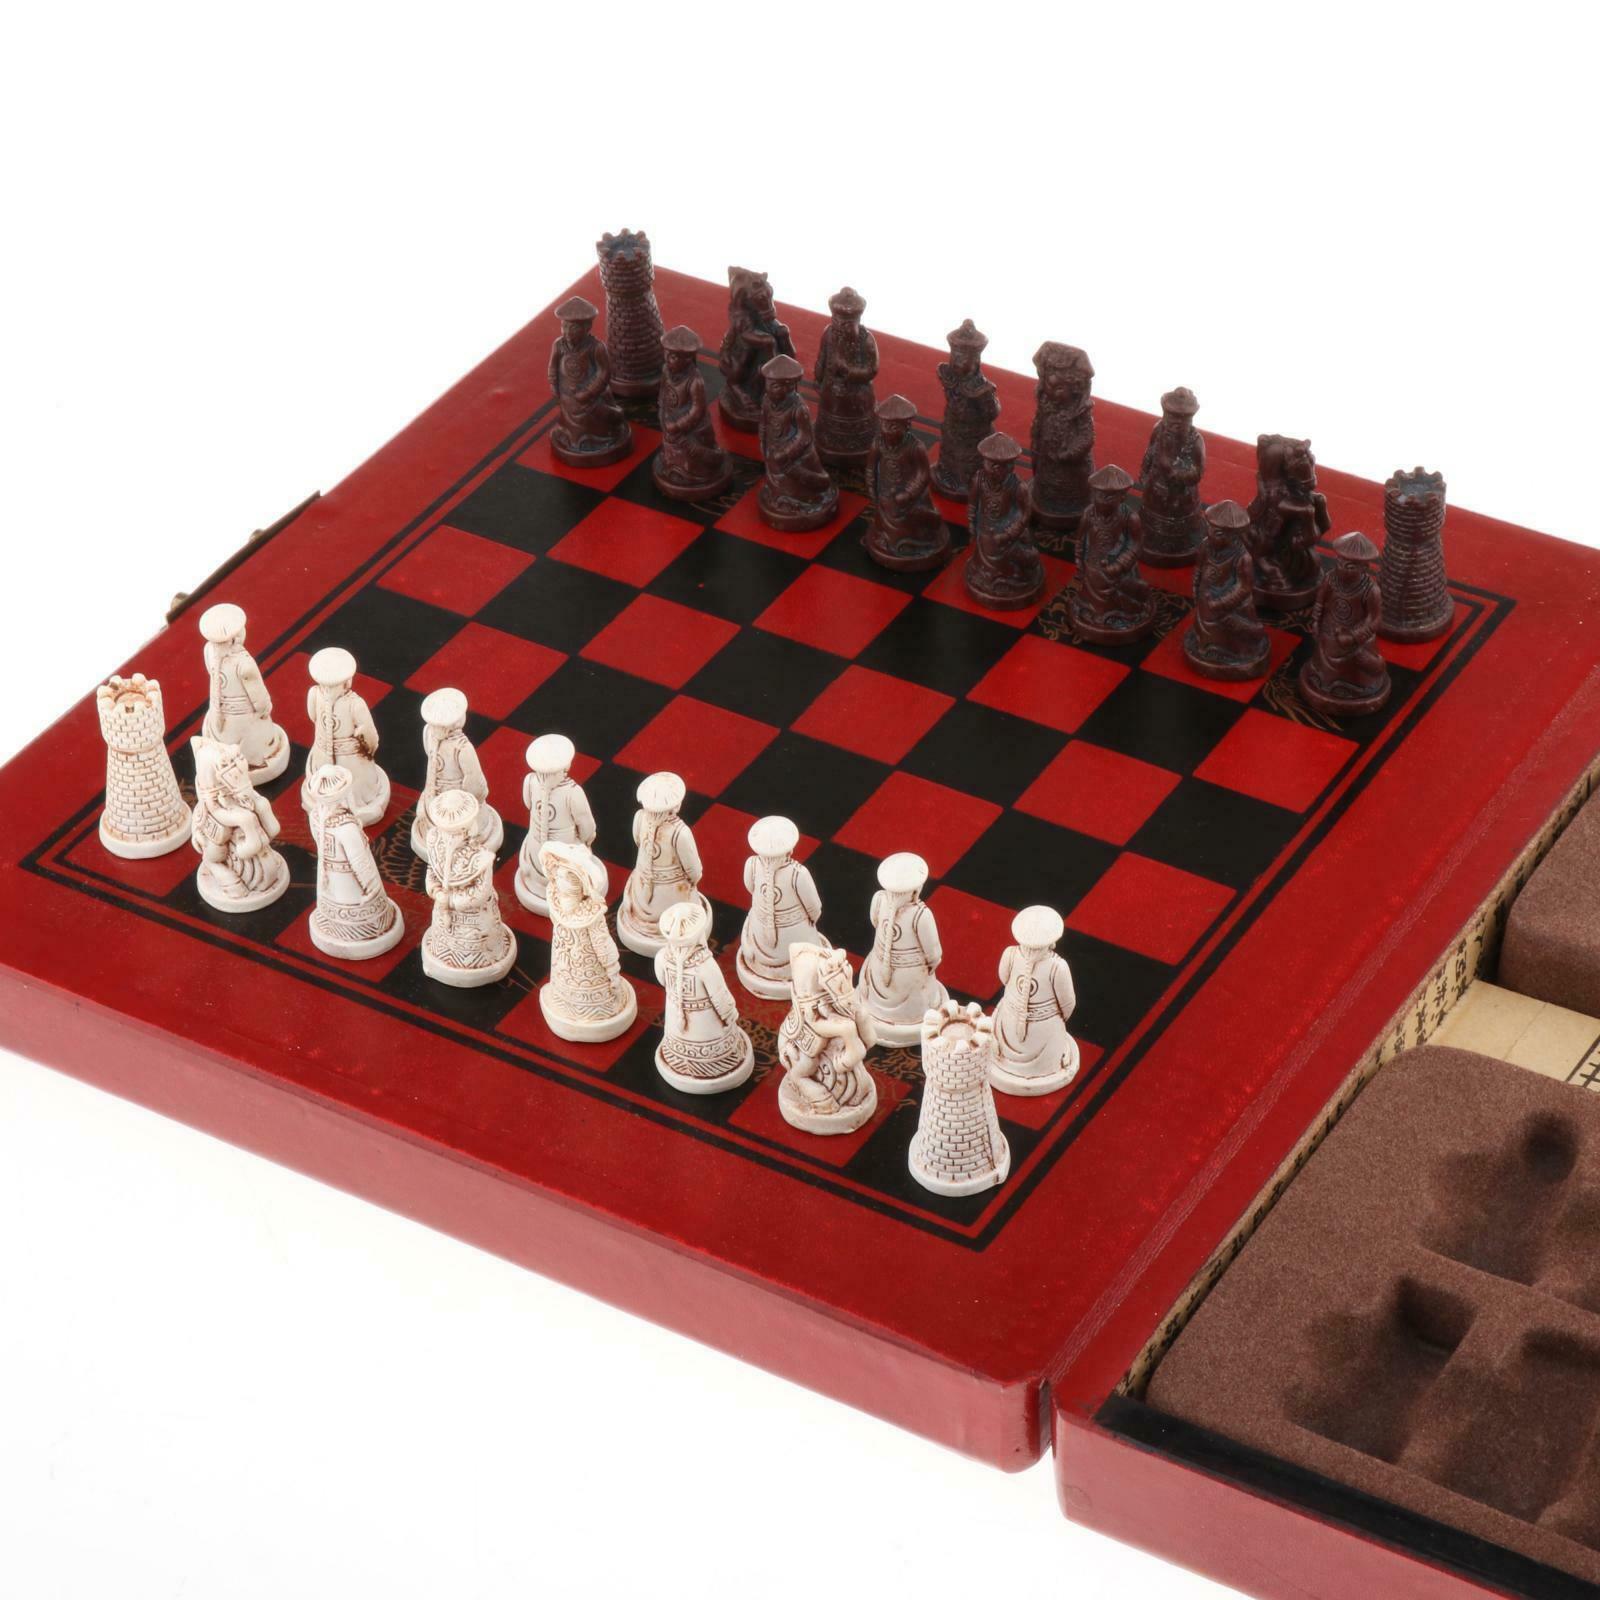 Wooden Folding Chess Set Foldable Chess Board Wood Playing Pieces Game Portable